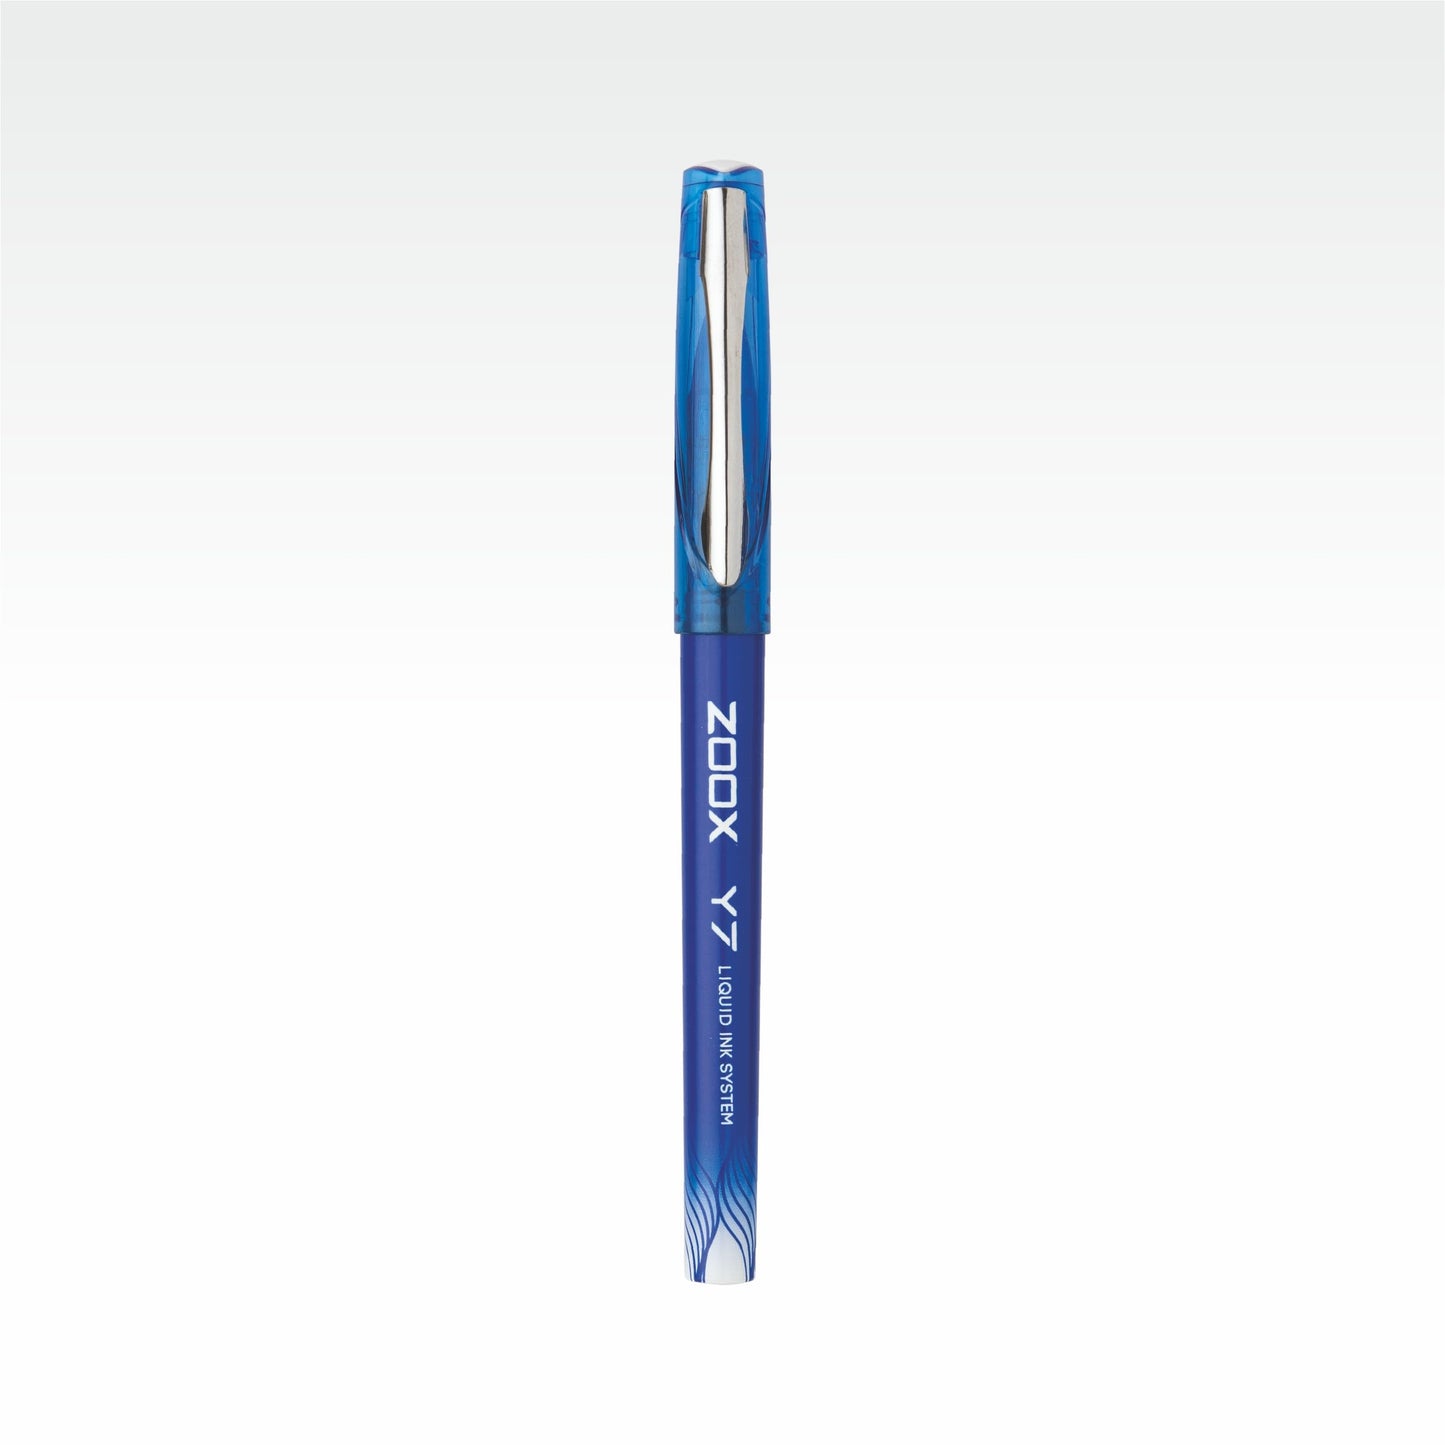 Flair Zoox Y7 Ball Pen | Sturdy Body With Elegant Metal Clip | Dotted Texture For Better Holding | Jumbo Refill With Large Ink Capacity | Blue Ink